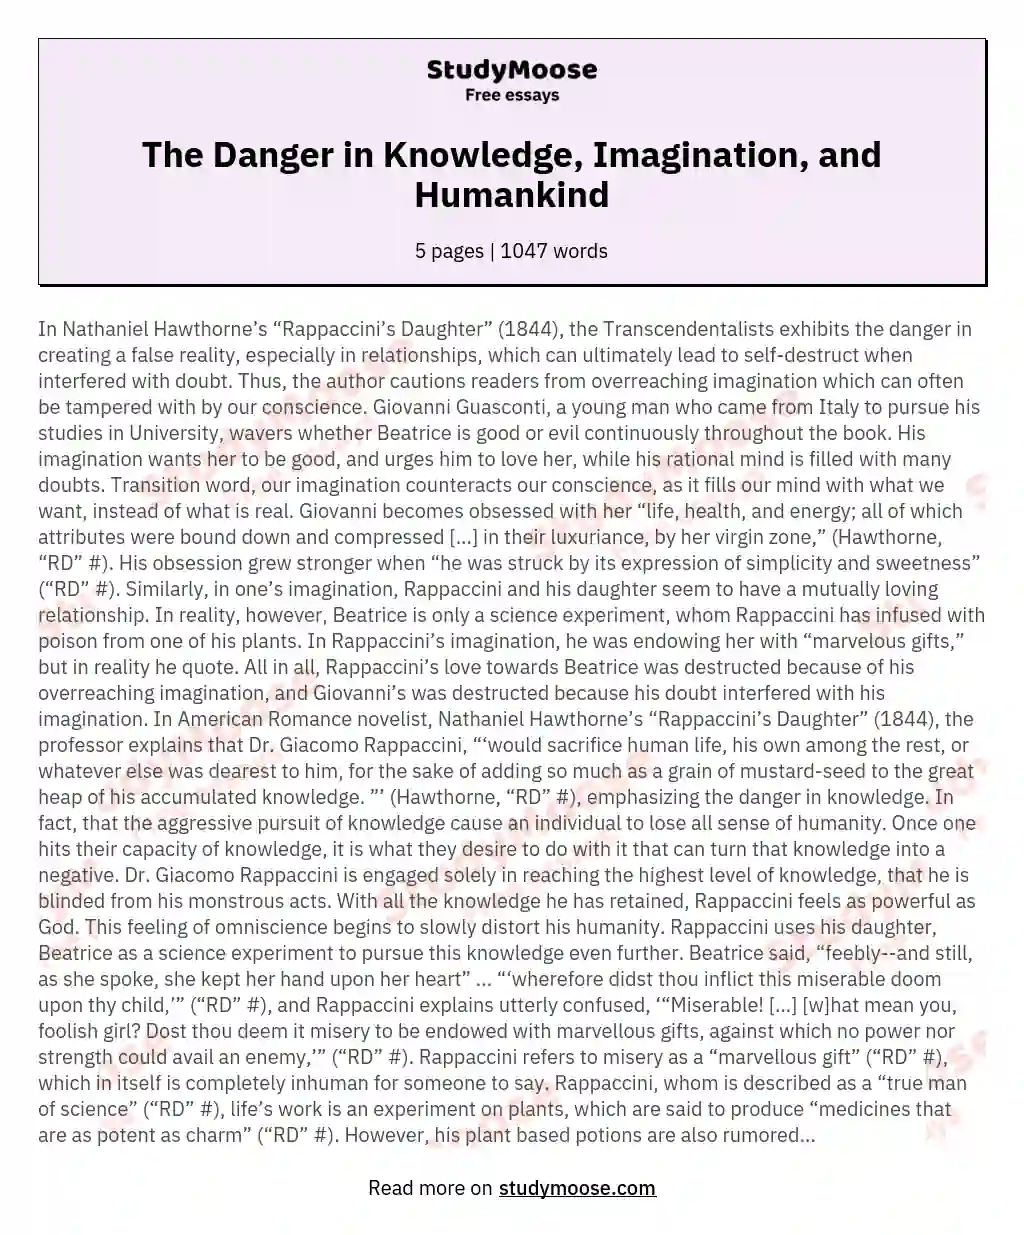 The Danger in Knowledge, Imagination, and Humankind